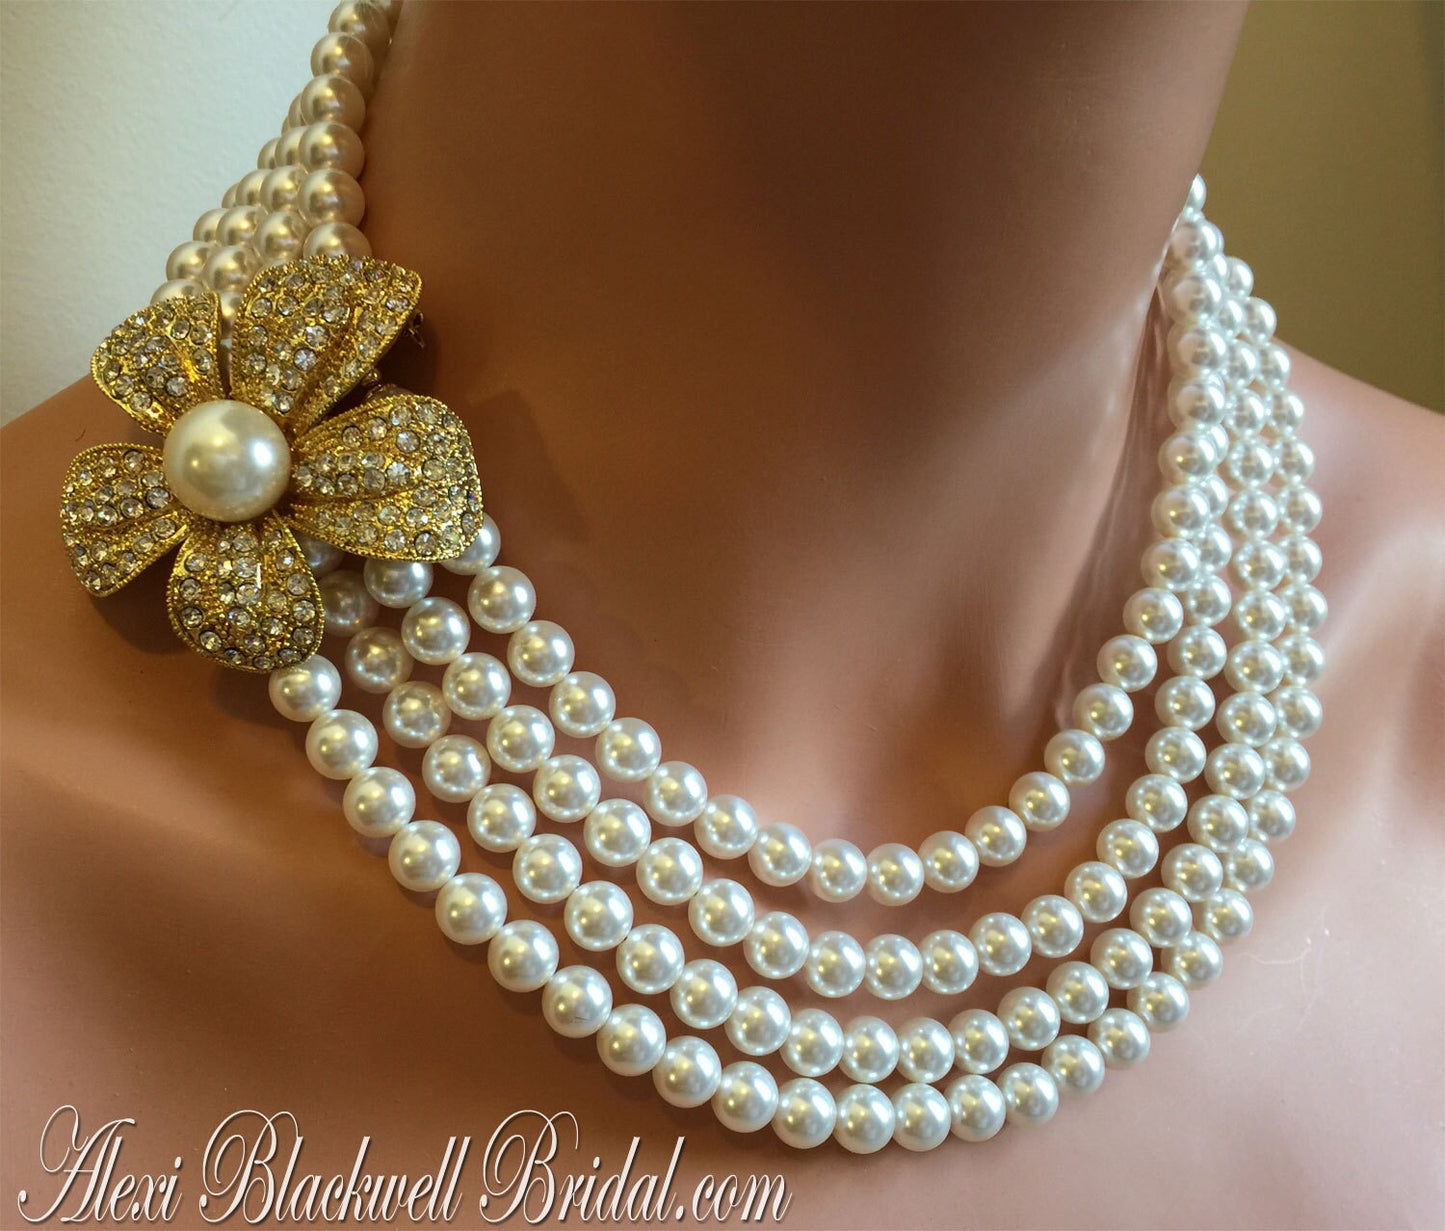 Pearl Statement Necklace with Brooch and Earrings Gold or Silver 4  Strands Crystal Pearls elegant Wedding jewelry Mother of the groom